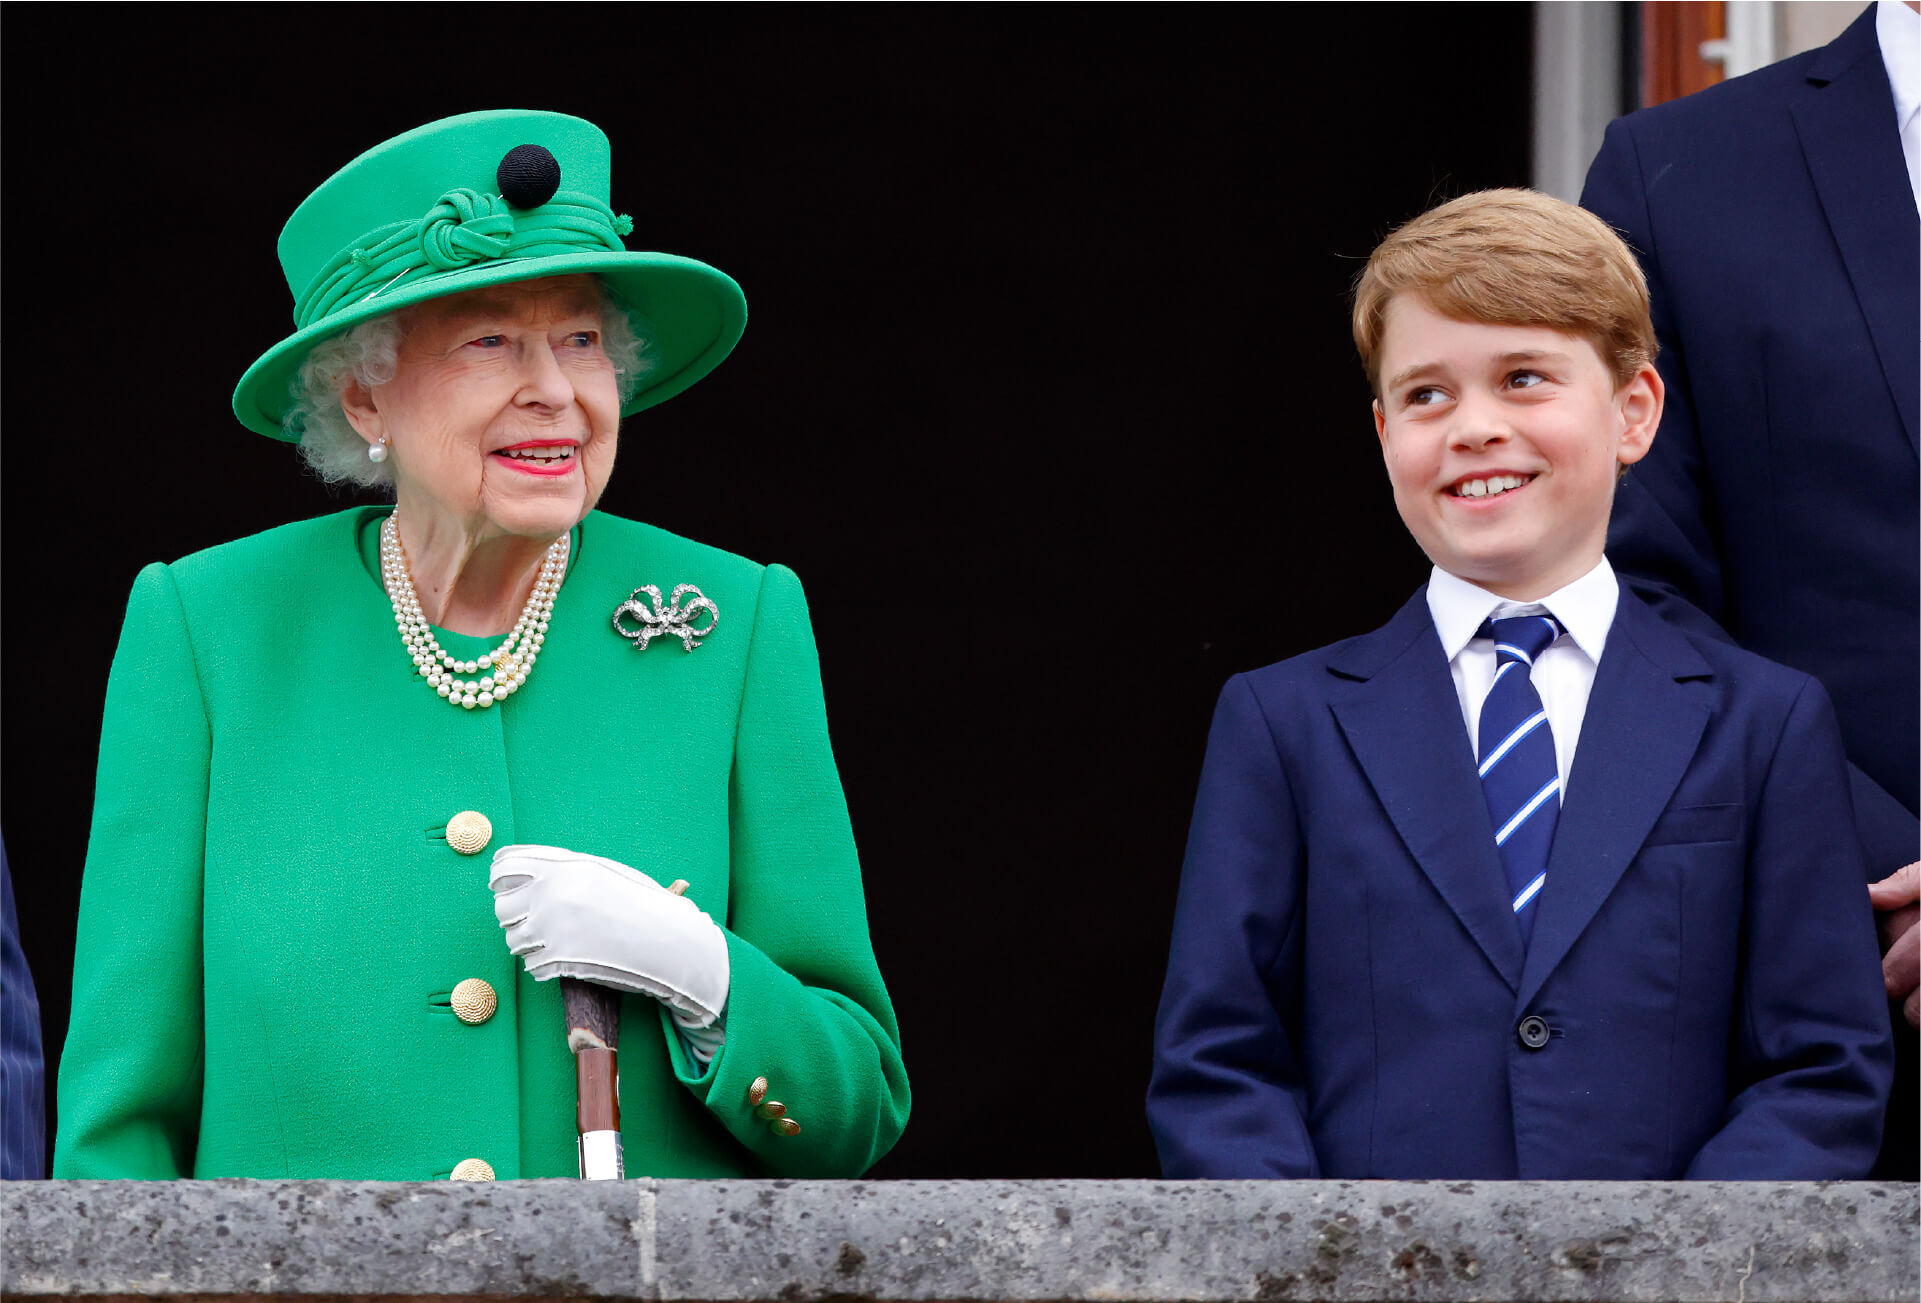 Queen Elizabeth standing on a balcony next to a smiling, young Prince George. The Queen wears an emerald green suit jacket with a matching wide-brimmed hat, a three-string pearl necklace and a diamond brooch. She leans on a cane which she grips with a white-gloved hand.